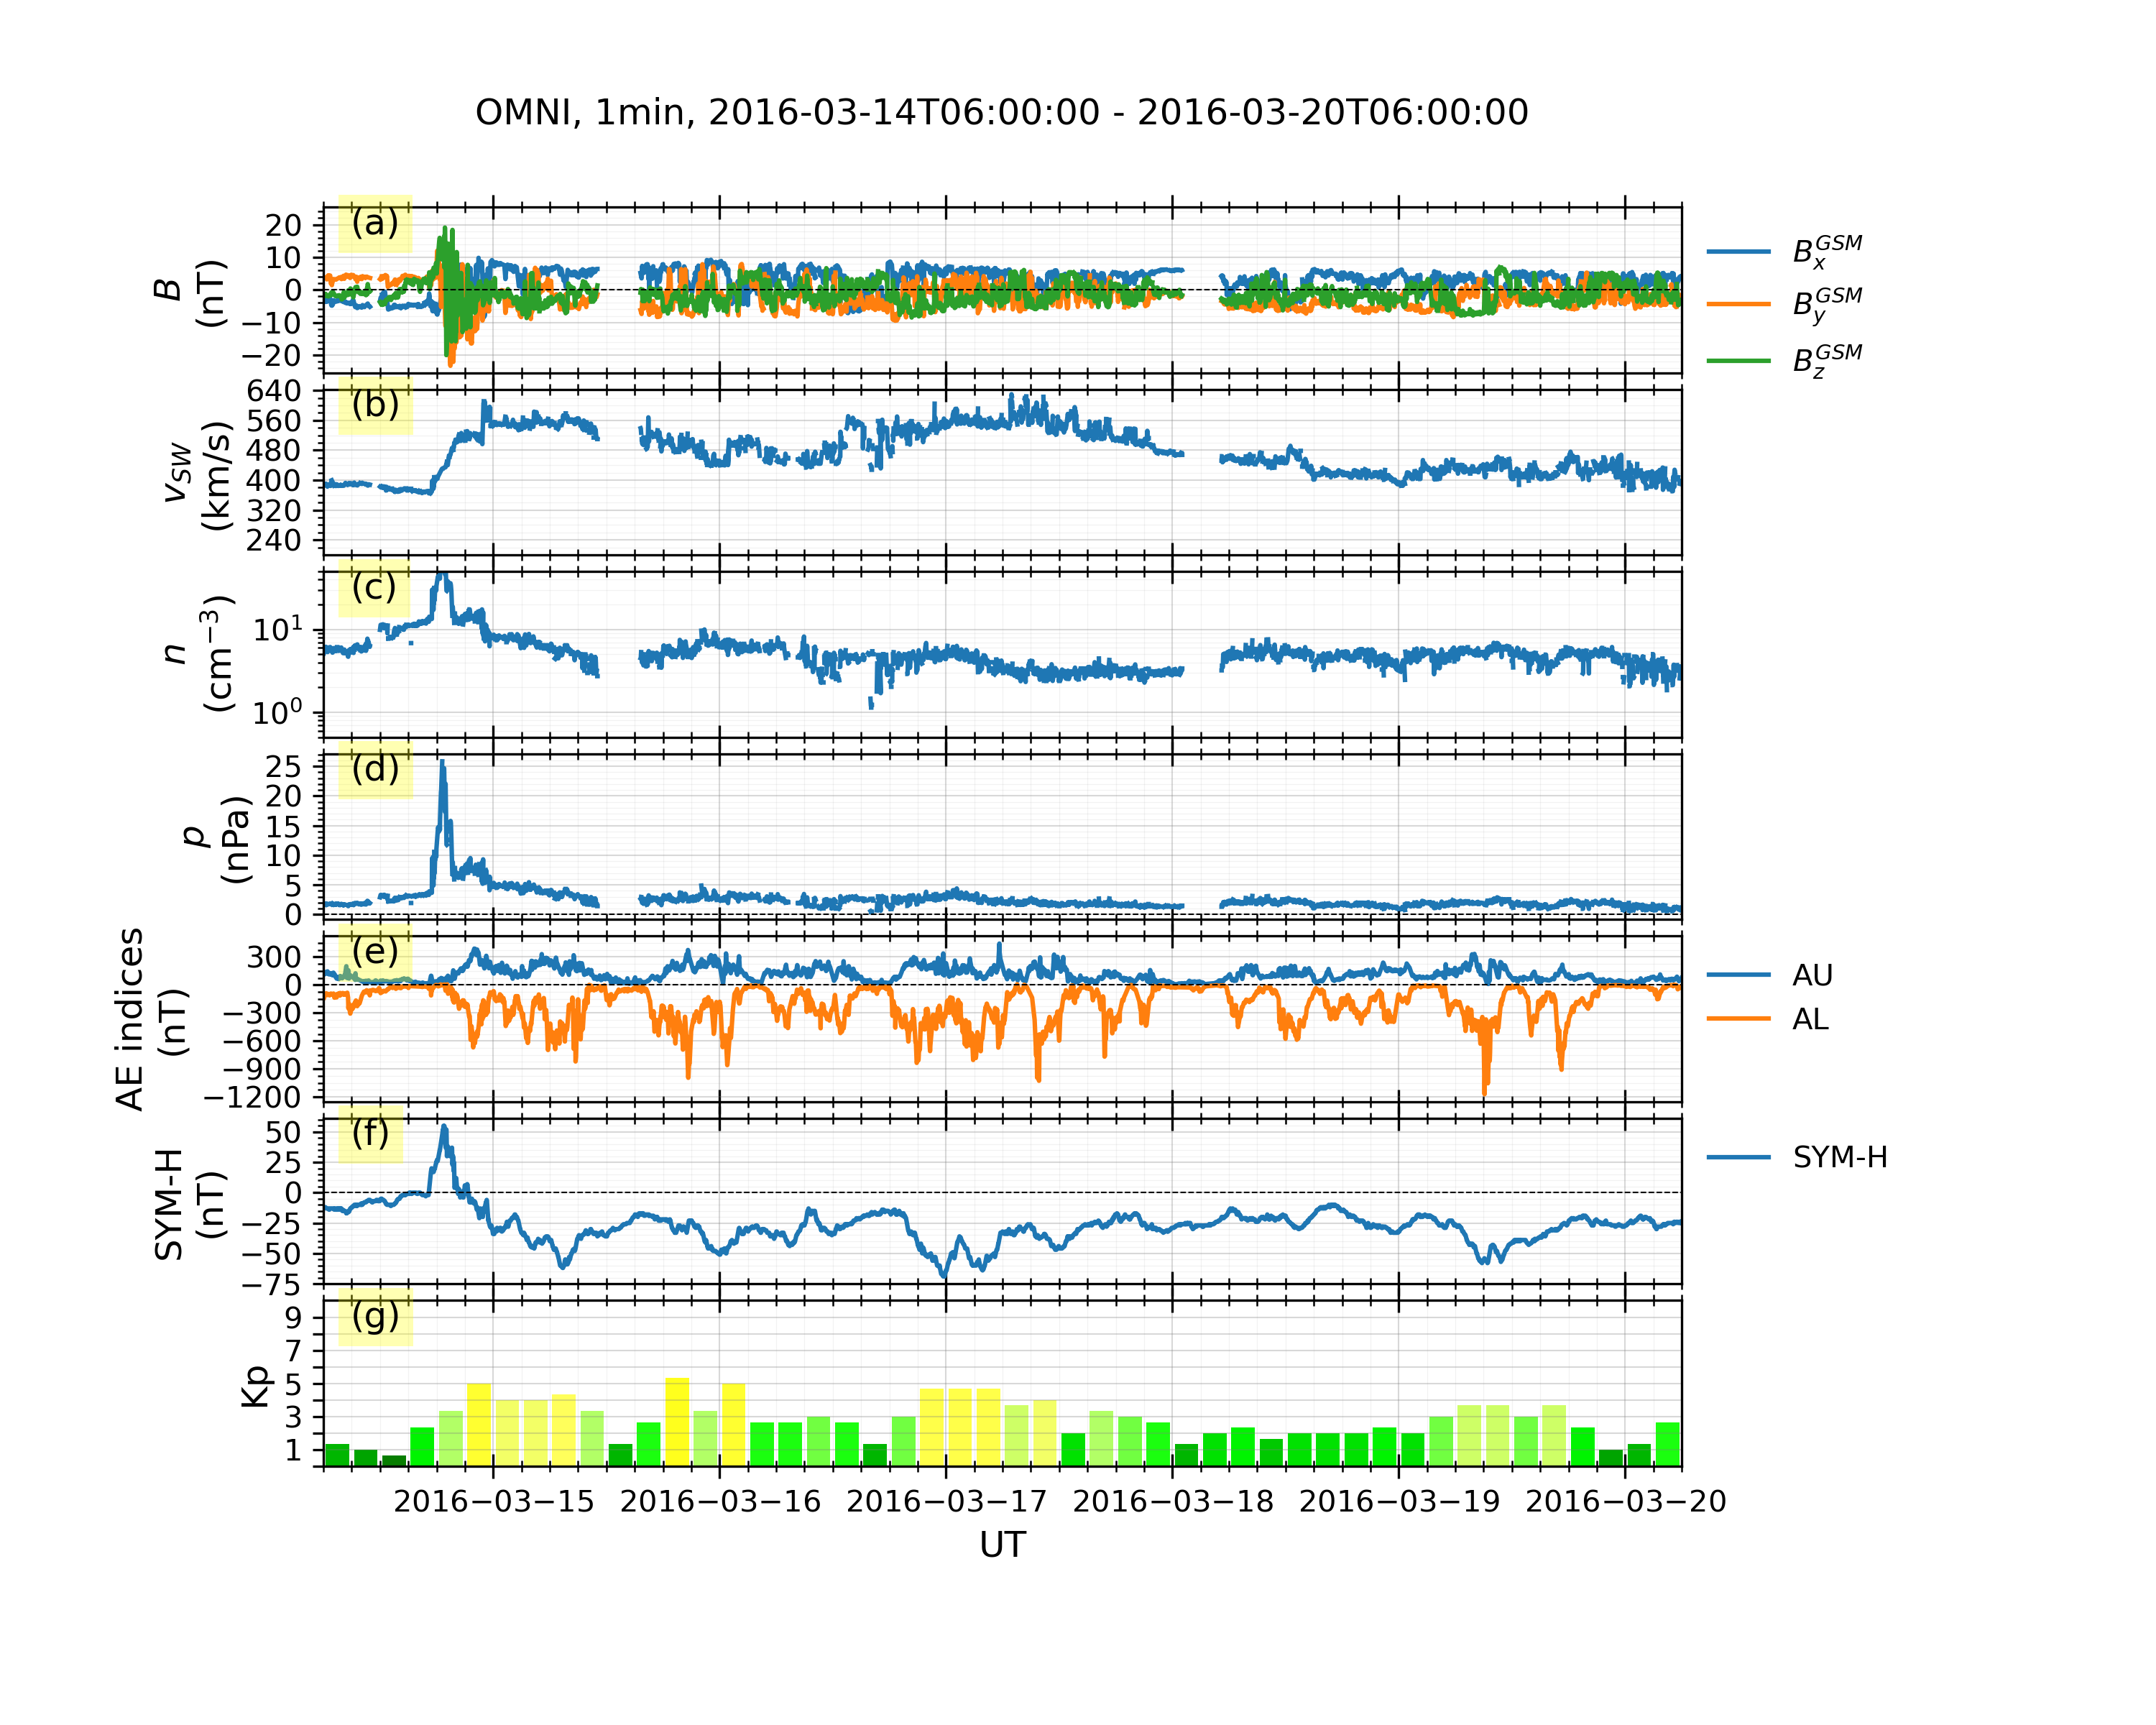 IMF and solar wind from the OMNI database and the geomagnetic indices from WDC and GFZ